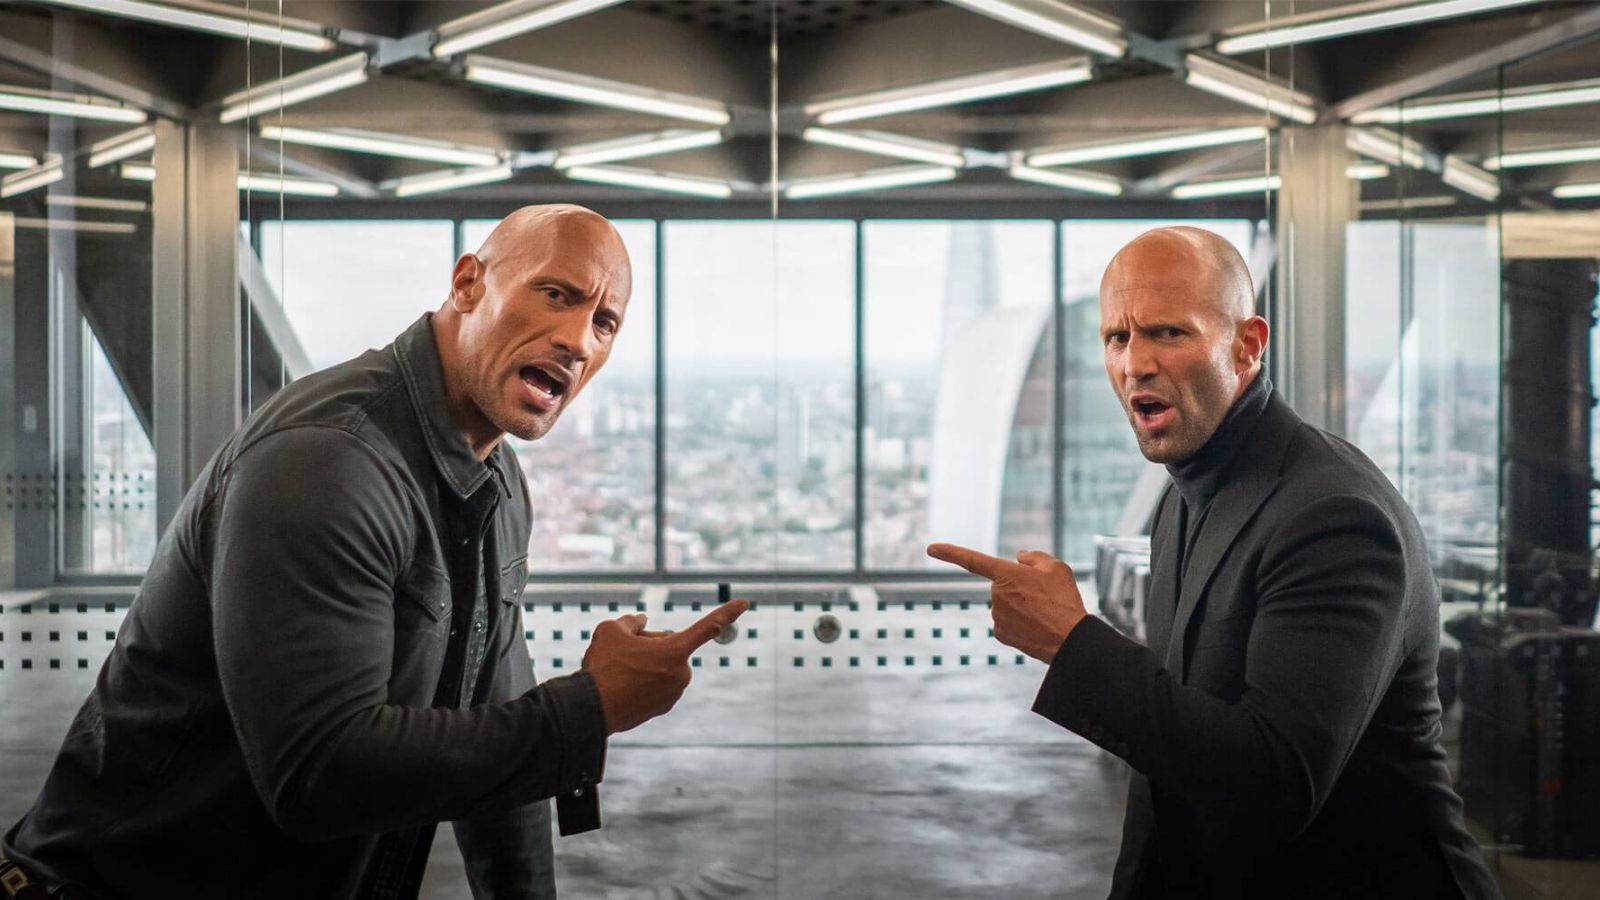 Dwayne Johnson and Jason Statham point aggressively to one another in Hobbs and Shaw